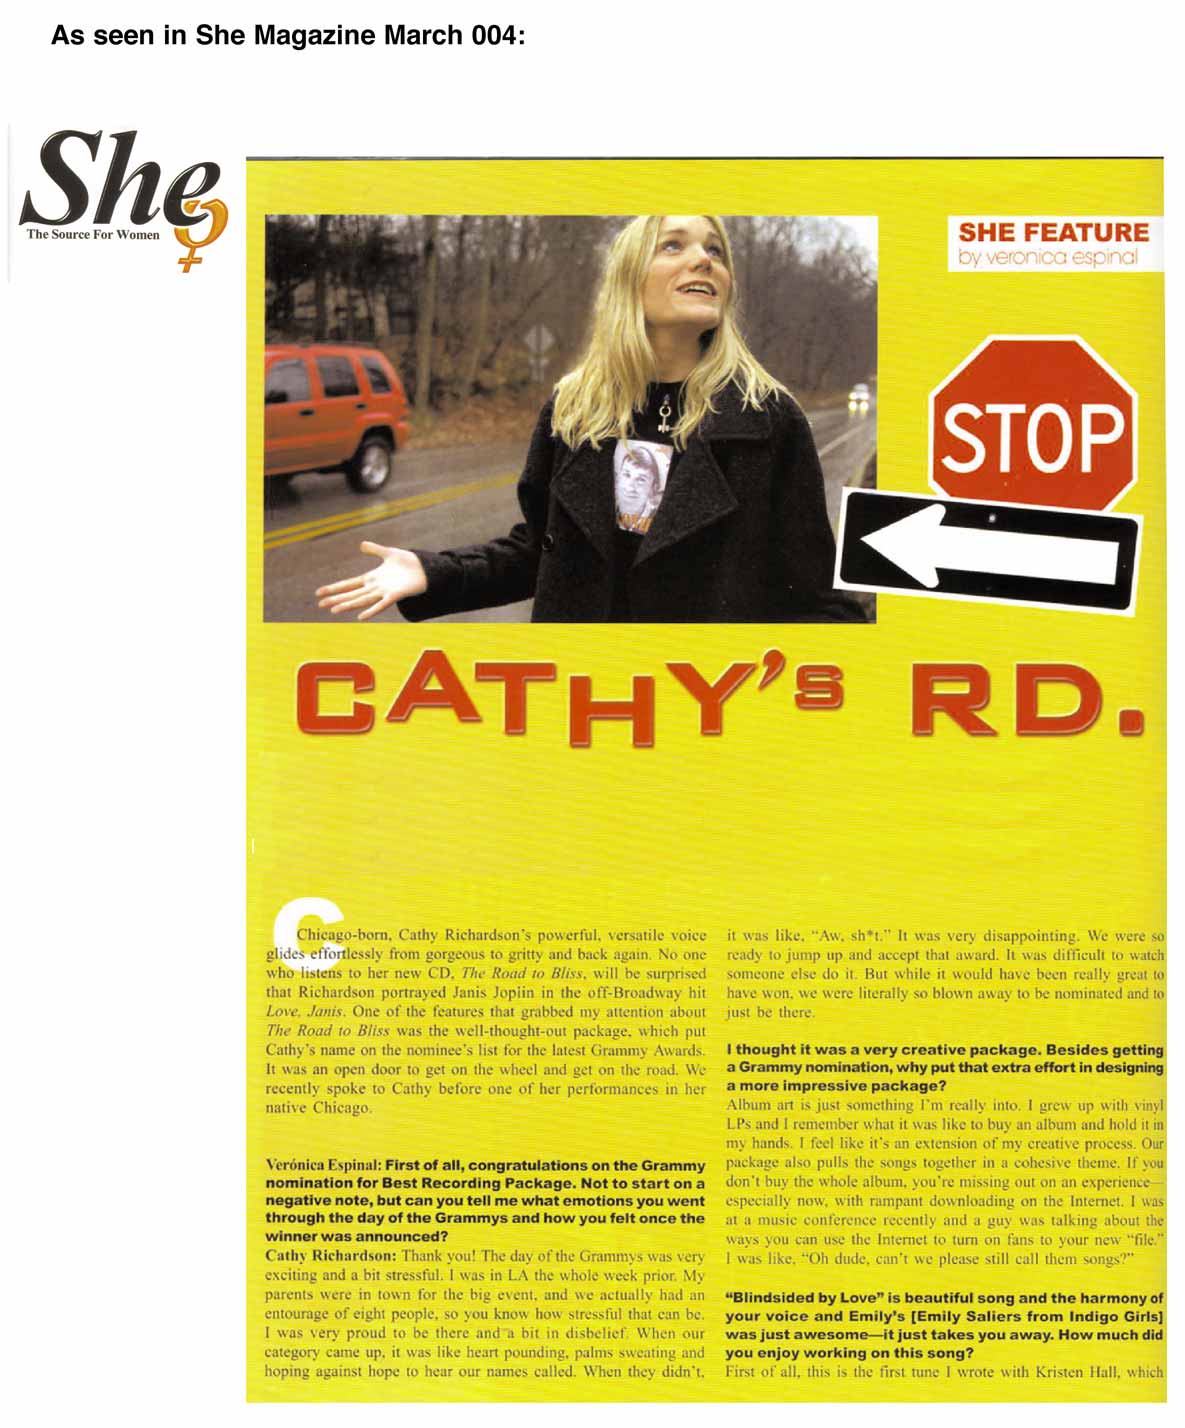 scan of She article